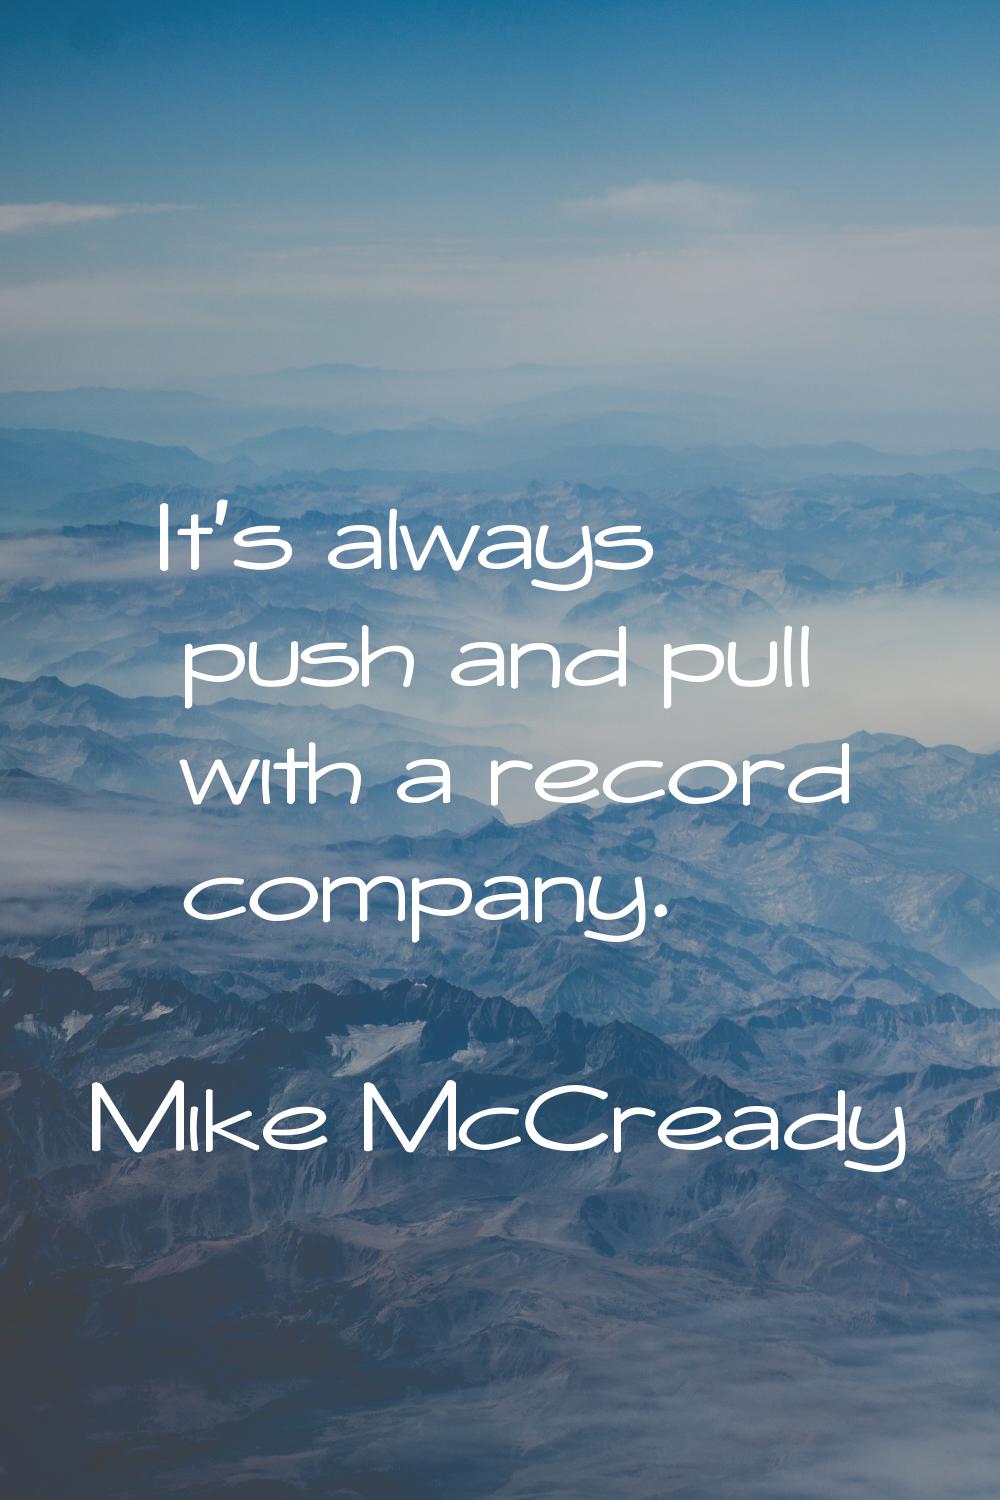 It's always push and pull with a record company.